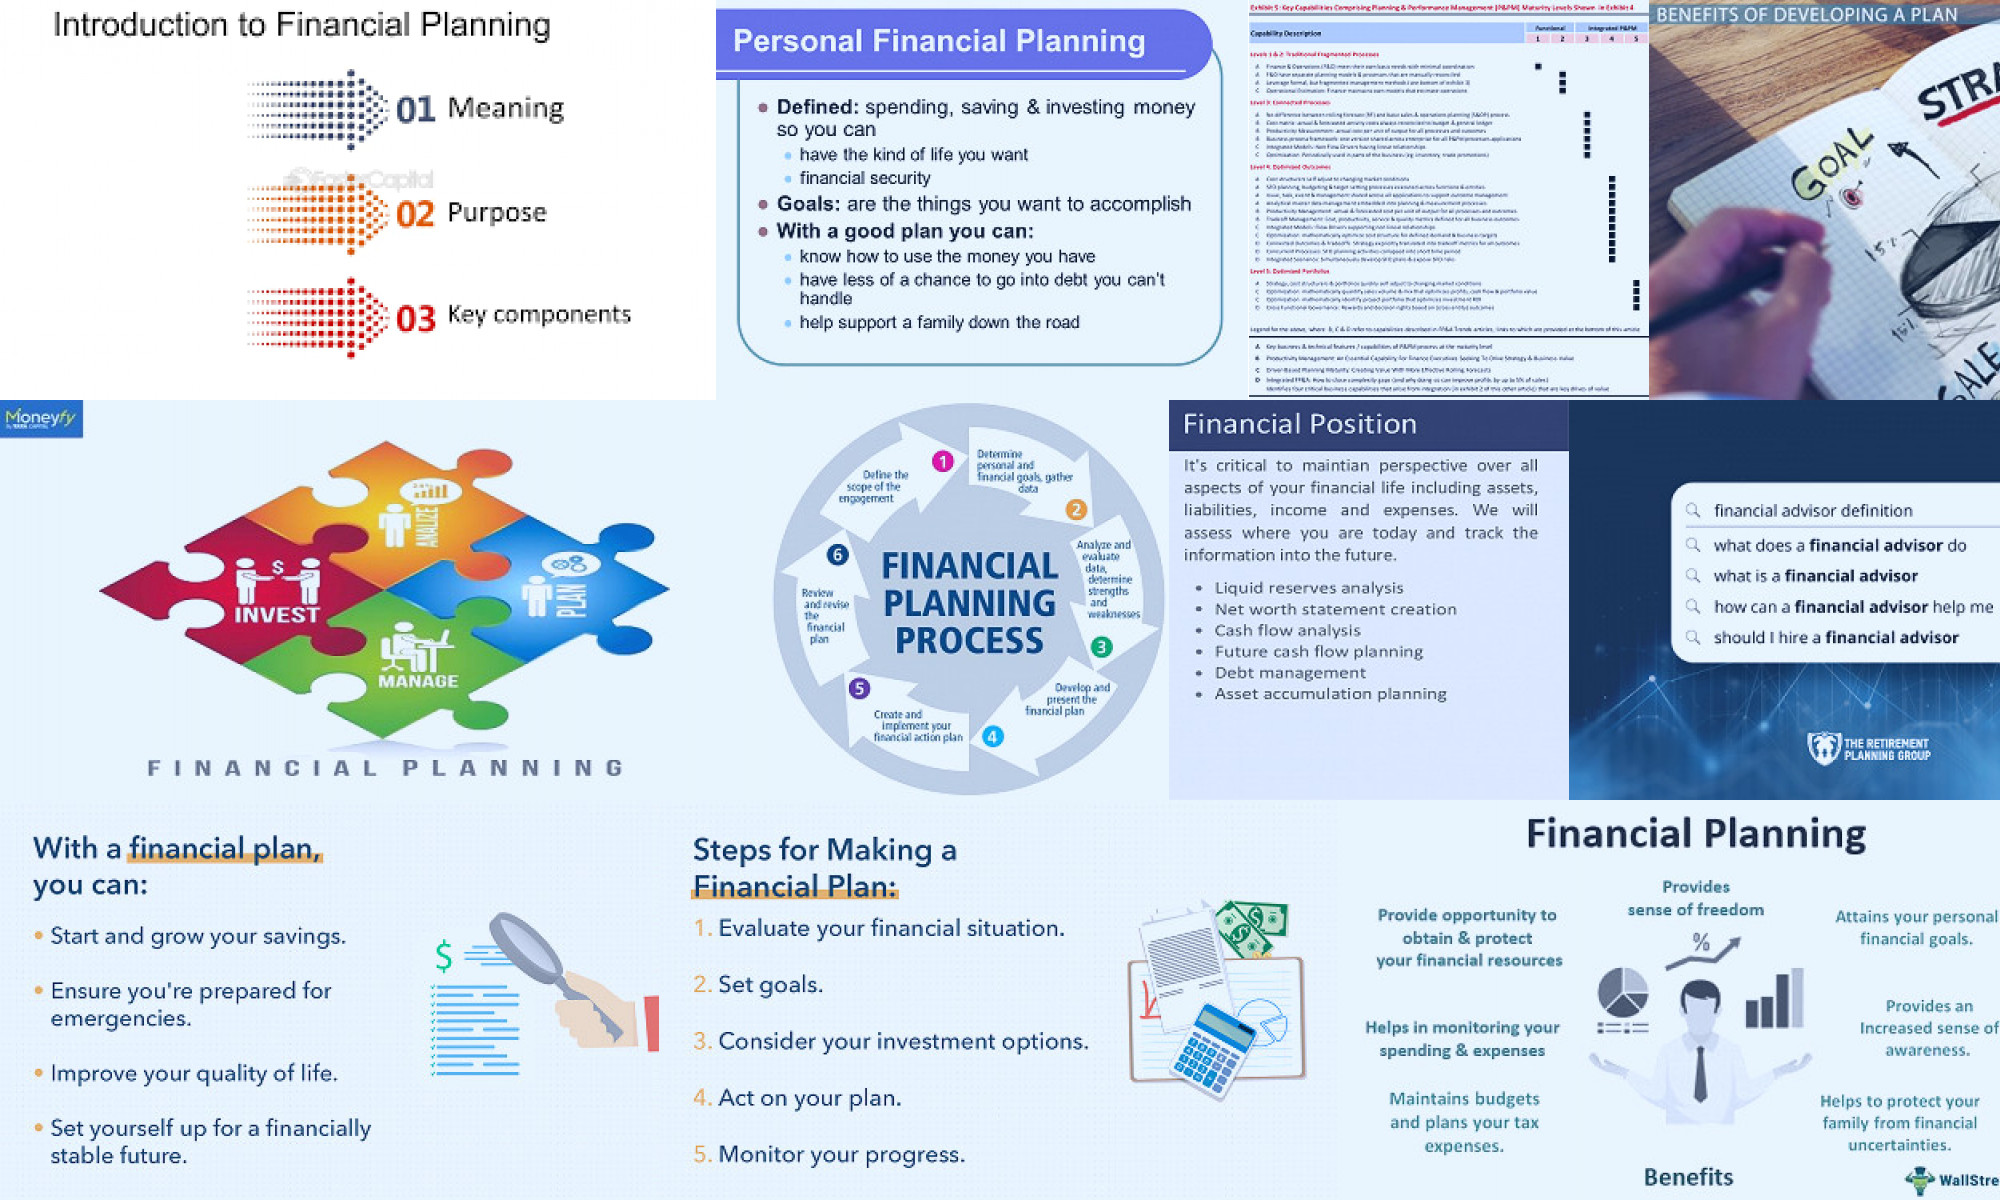 financial planning definition